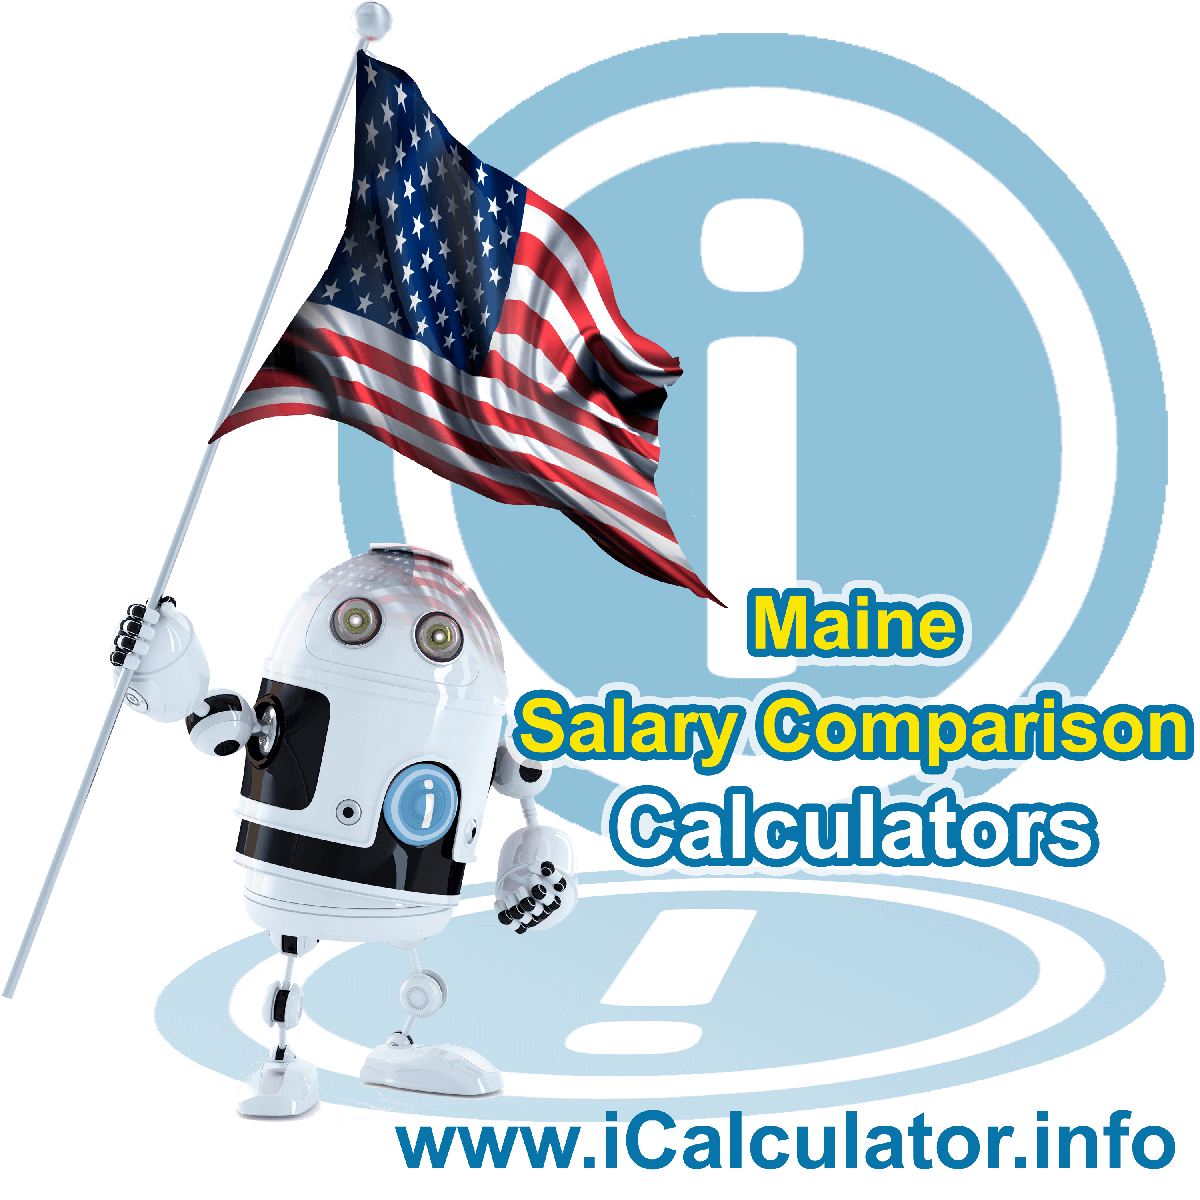 Maine Salary Comparison Calculator 2022 | iCalculator™ | The Maine Salary Comparison Calculator allows you to quickly calculate and compare upto 6 salaries in Maine or compare with other states for the 2022 tax year and historical tax years. 